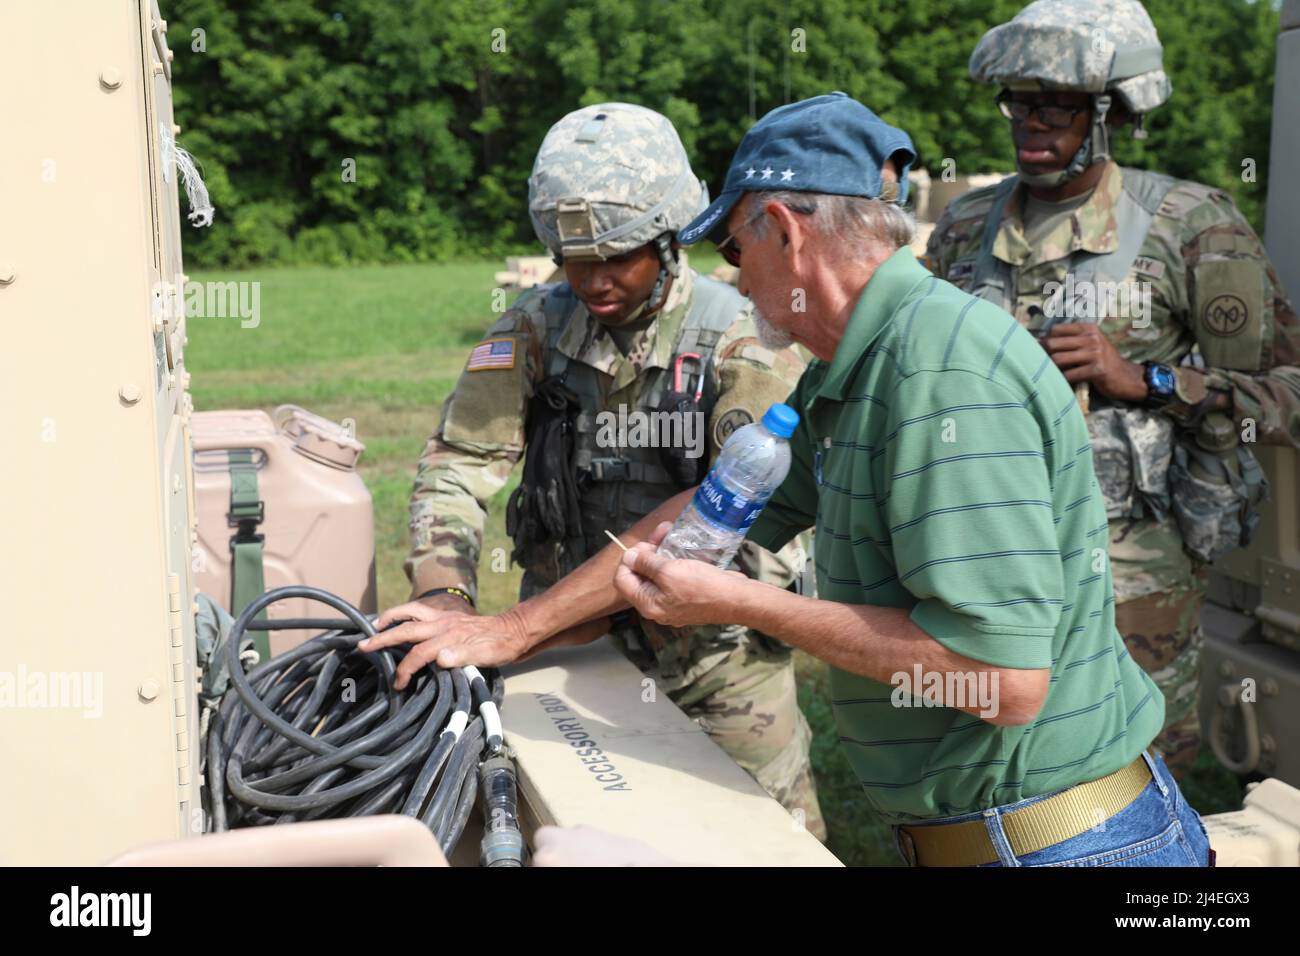 Jacques Hamellin, an instructor with PM Radars, shows Soldiers in the radar section of the 27th Infantry Brigade Combat Team how to store the cables for the radar while fielding the new AN/TPQ-50 Lightweight Counter Mortar Radar (LCMR) on July 31, 2019, at Fort Drum, New York. Hamellin is a retired service member from Oklahoma.( U.S. Army National Guard photo by Sgt. Andrew Winchell ) Counter rocket, artillery, and mortar, abbreviated C-RAM or counter-RAM, is a set of systems used to detect and/or destroy incoming rockets, artillery, and mortar rounds in the air before they hit their targets. Stock Photo